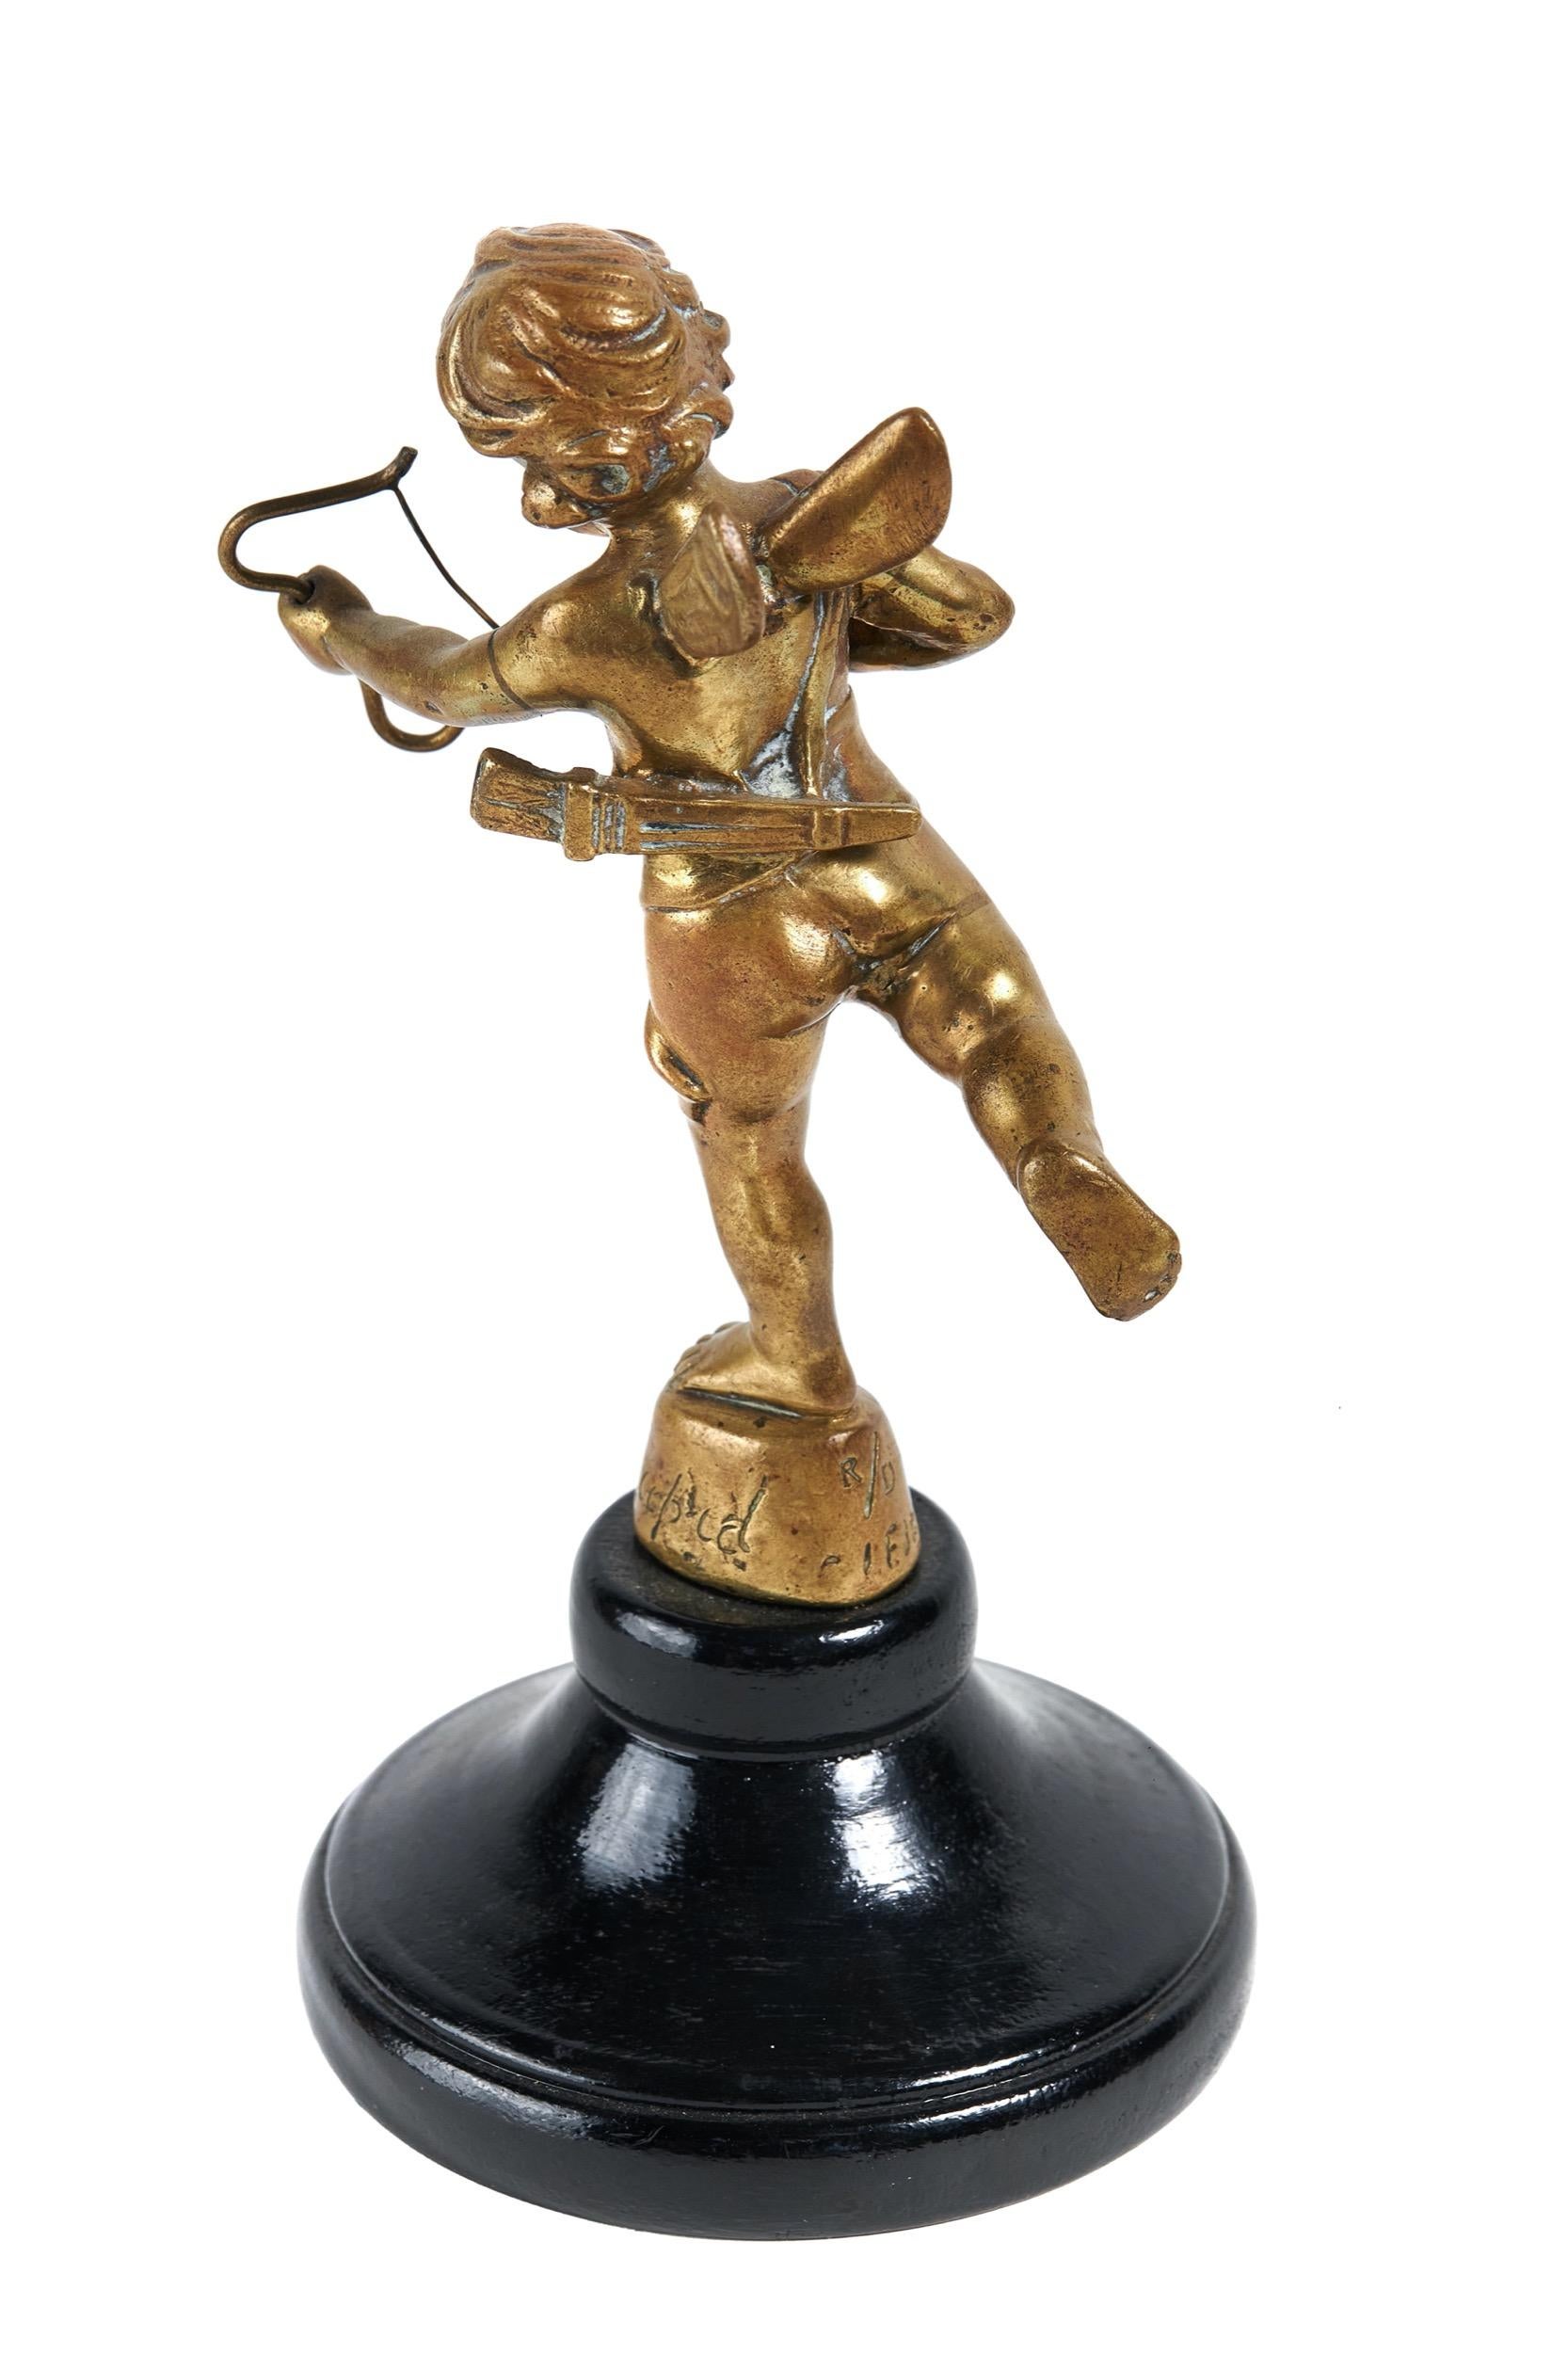 Vintage  Cubitt car mascot in the form of  brass Cupid with bow & arrow,stamped Cubitts Cupid, R/D LE JEUNE
Cast Brass 
original car mascot 1920s
Dimensions: Cupid Figure H 13.5cm x W 10cm
Mounted On Black Painted Wood Turned Base